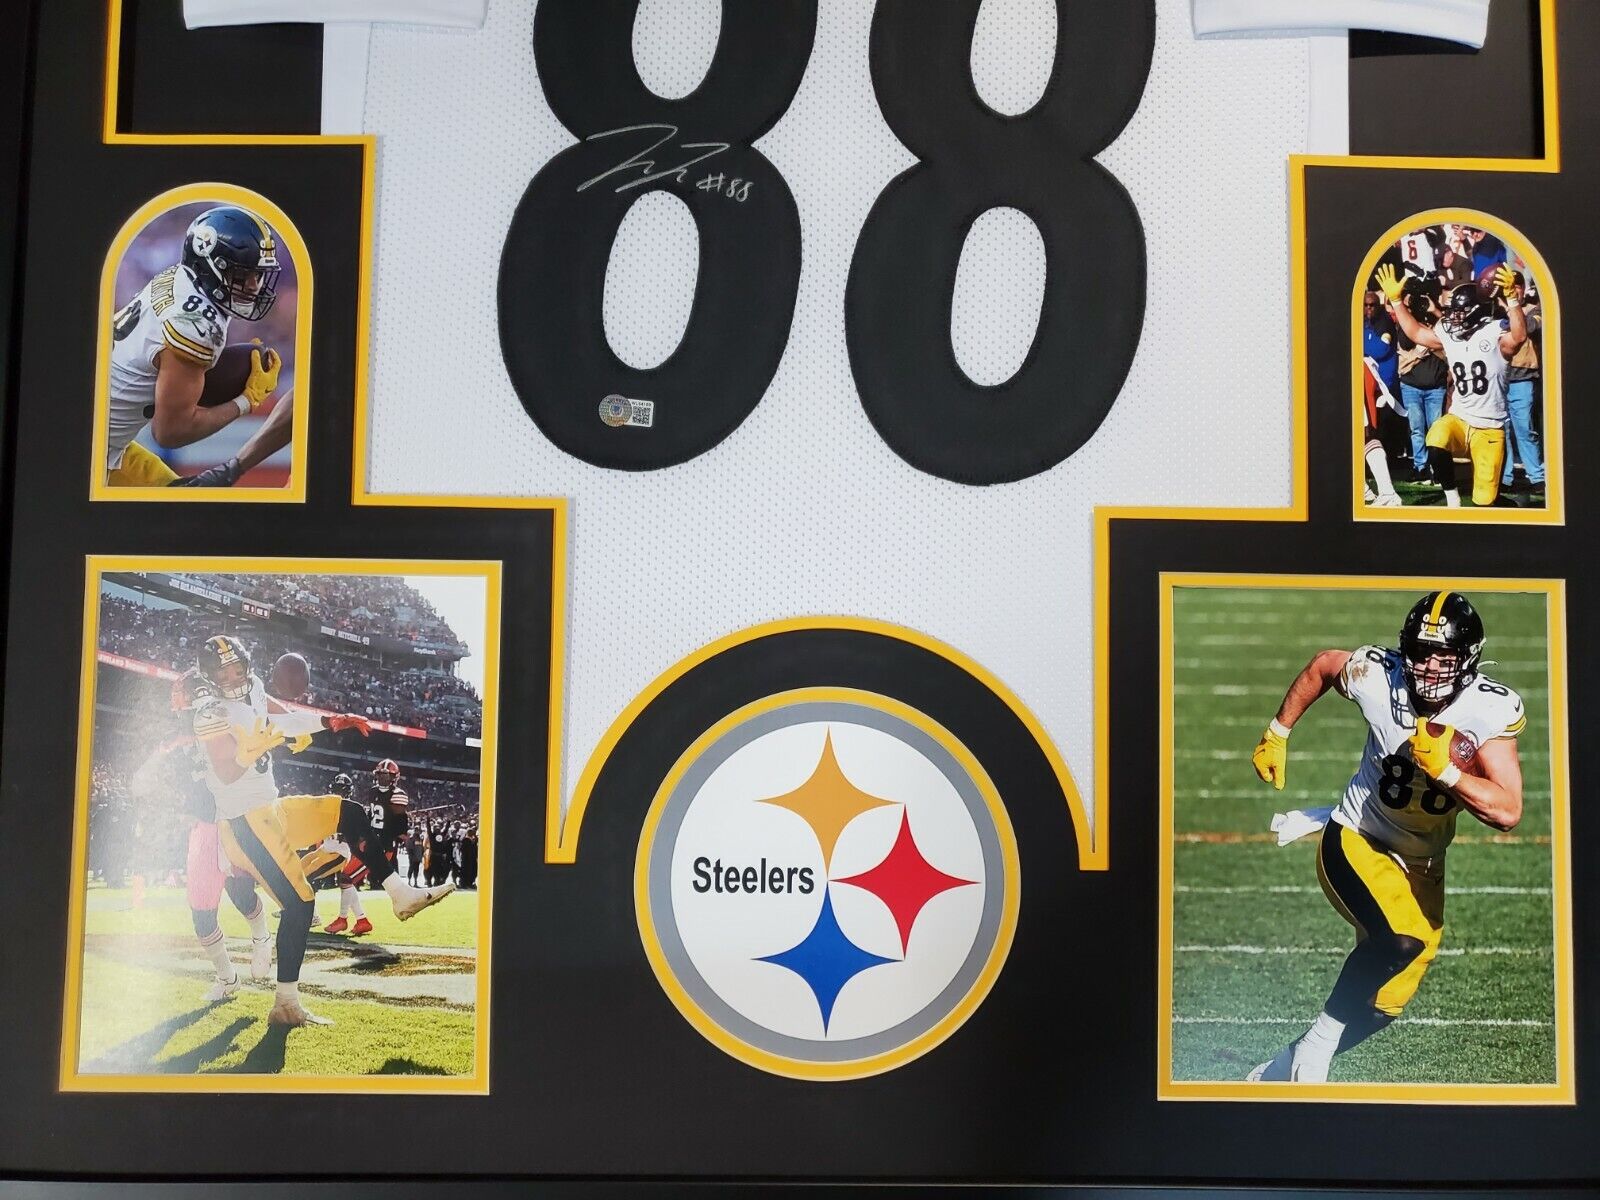 MVP Authentics Framed Pittsburgh Steelers Pat Freiermuth Autographed Signed Jersey Beckett Holo 405 sports jersey framing , jersey framing